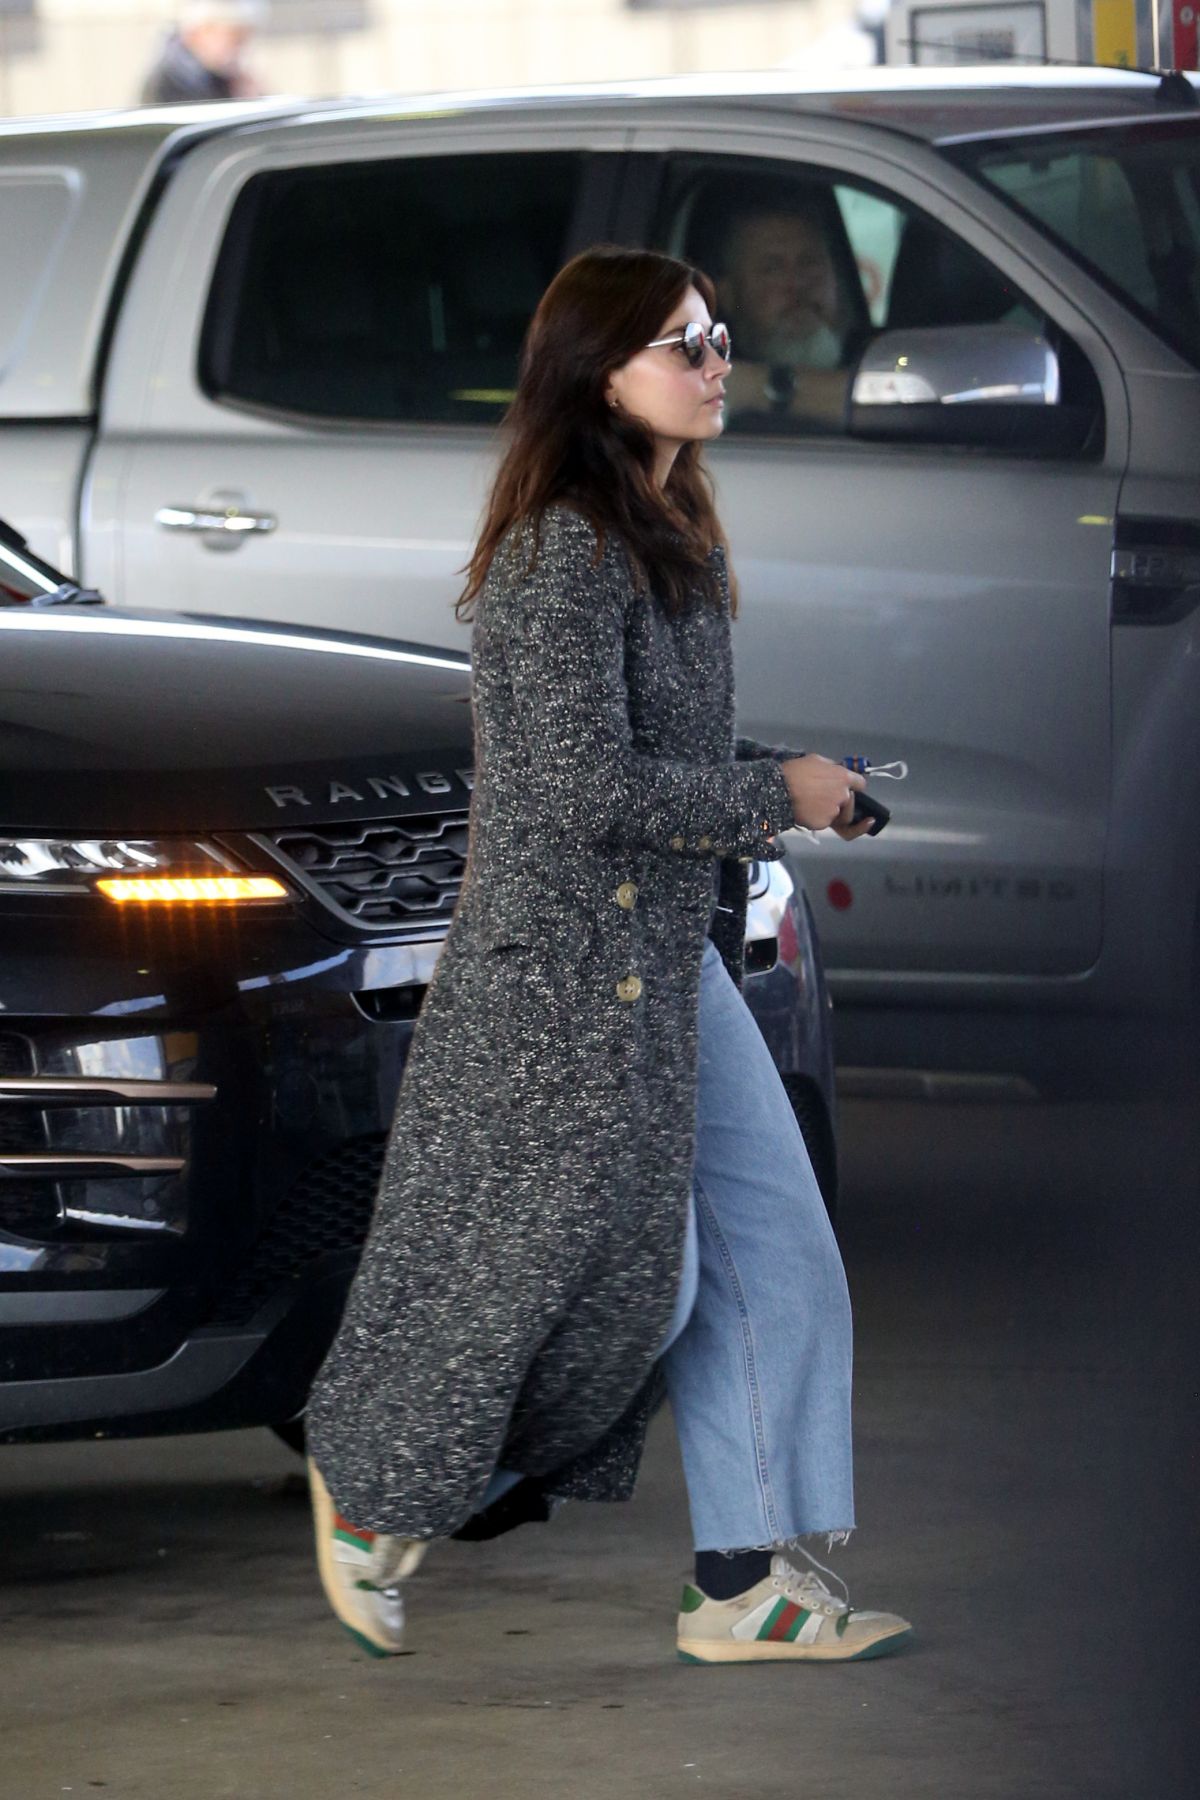 Jenna-Louise Coleman in Long Coat with Jeans at a Gas Station in London 2020/11/15